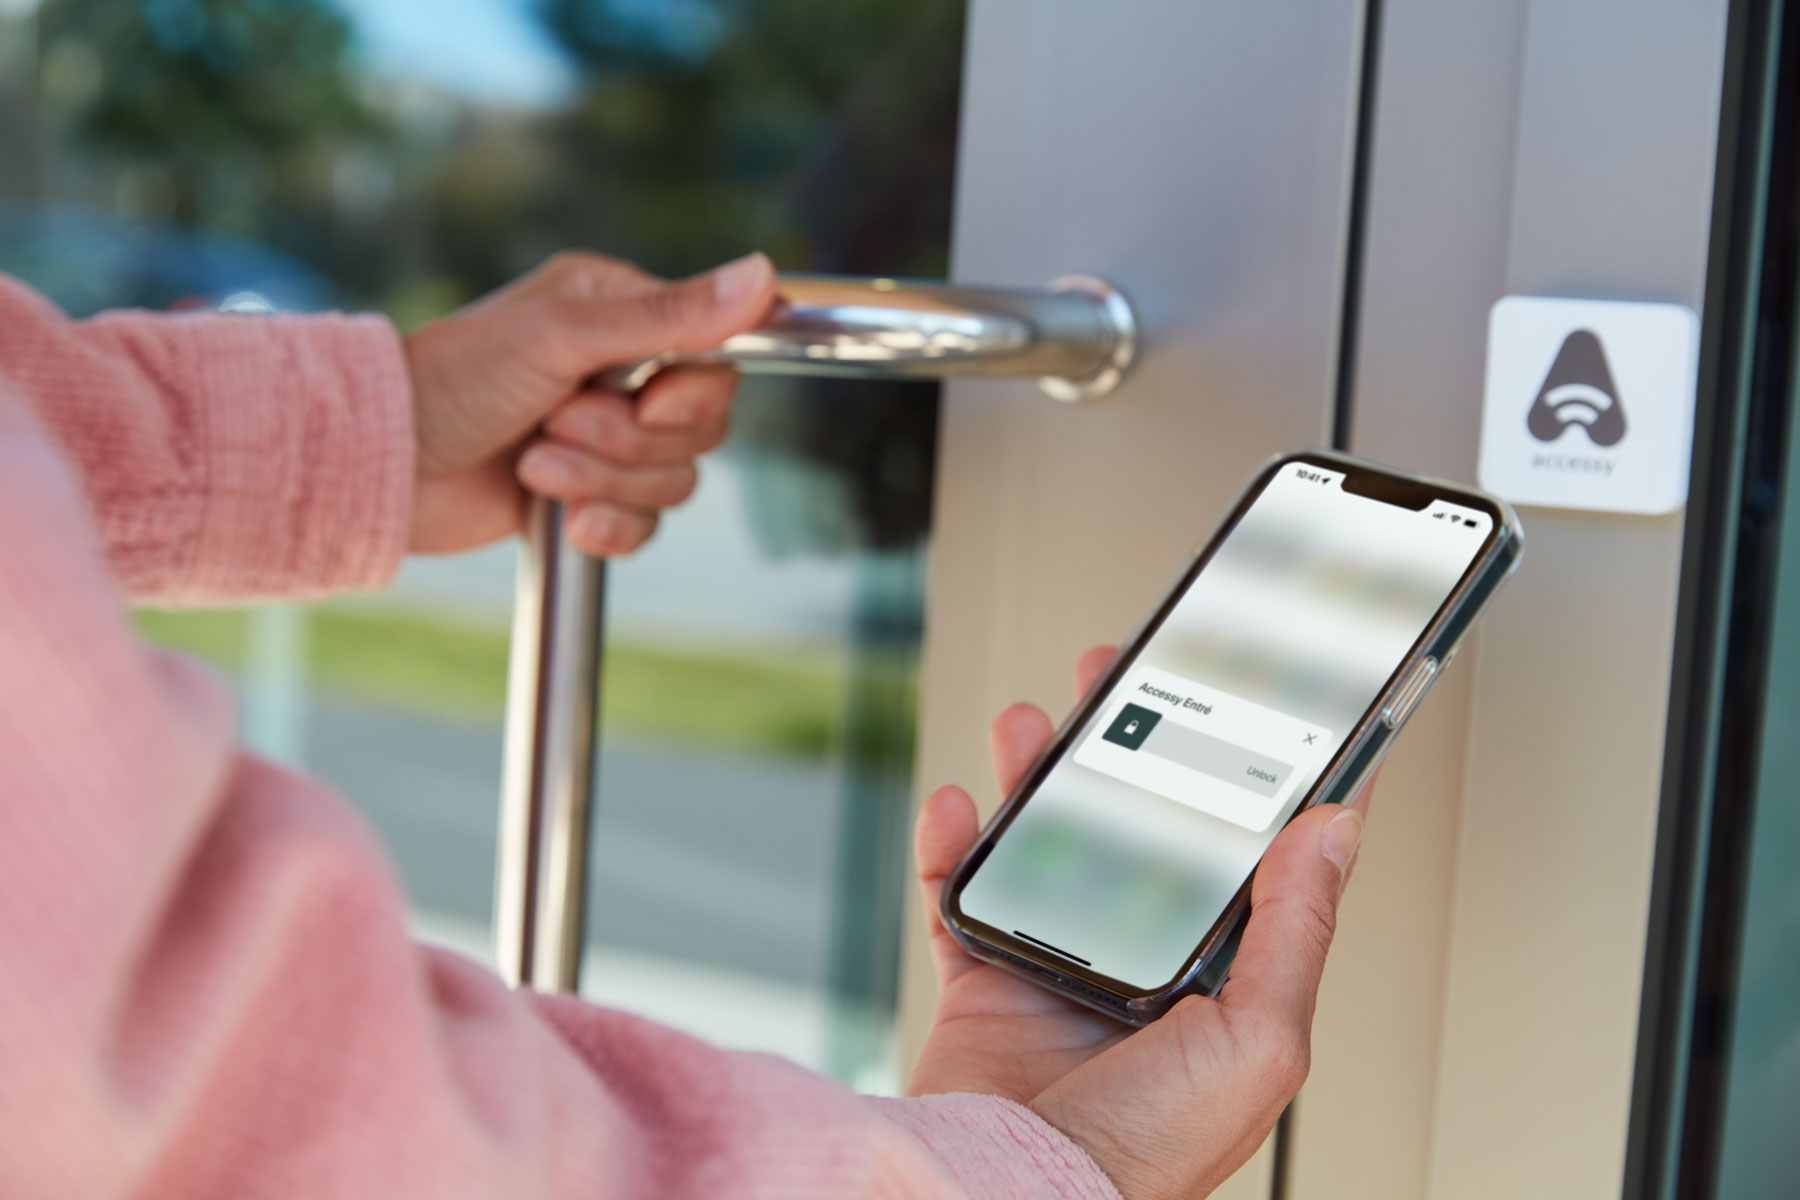 A person using the Accessy app to open the front door to a office building